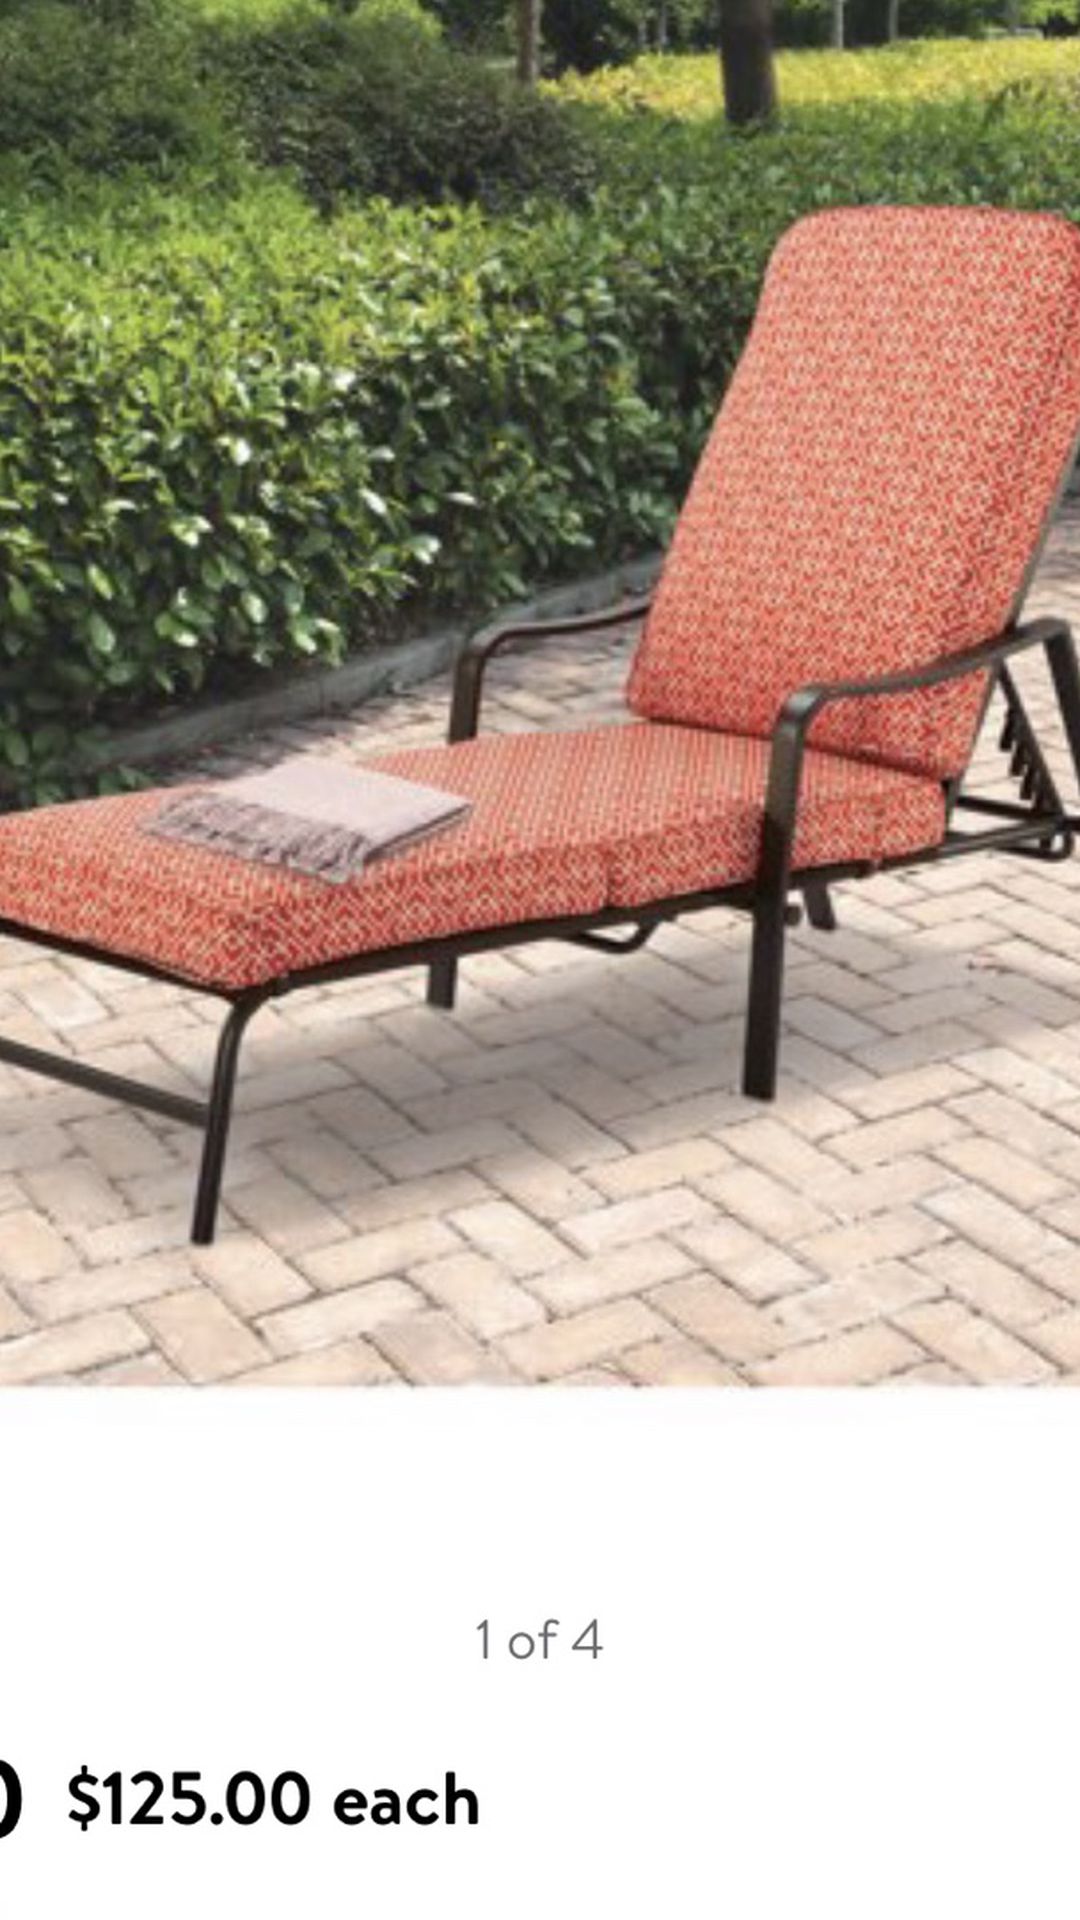 Mainstays Outdoor Patio Chaise Lounge